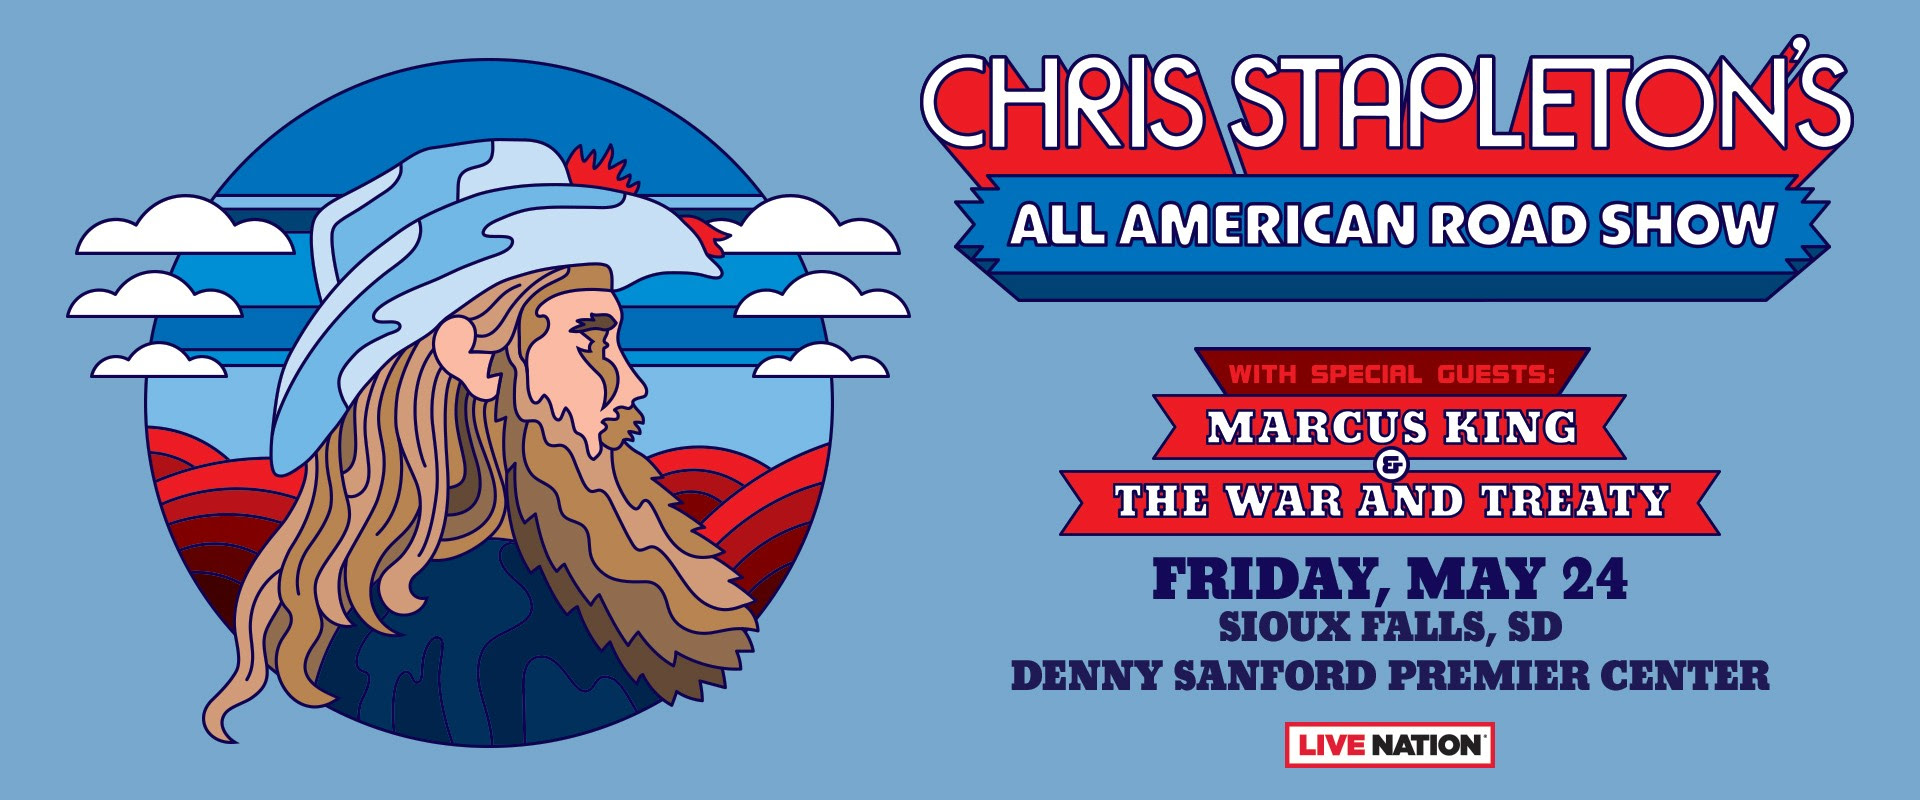 <h1 class="tribe-events-single-event-title">Chris Stapleton May 25th in Sioux Falls</h1>